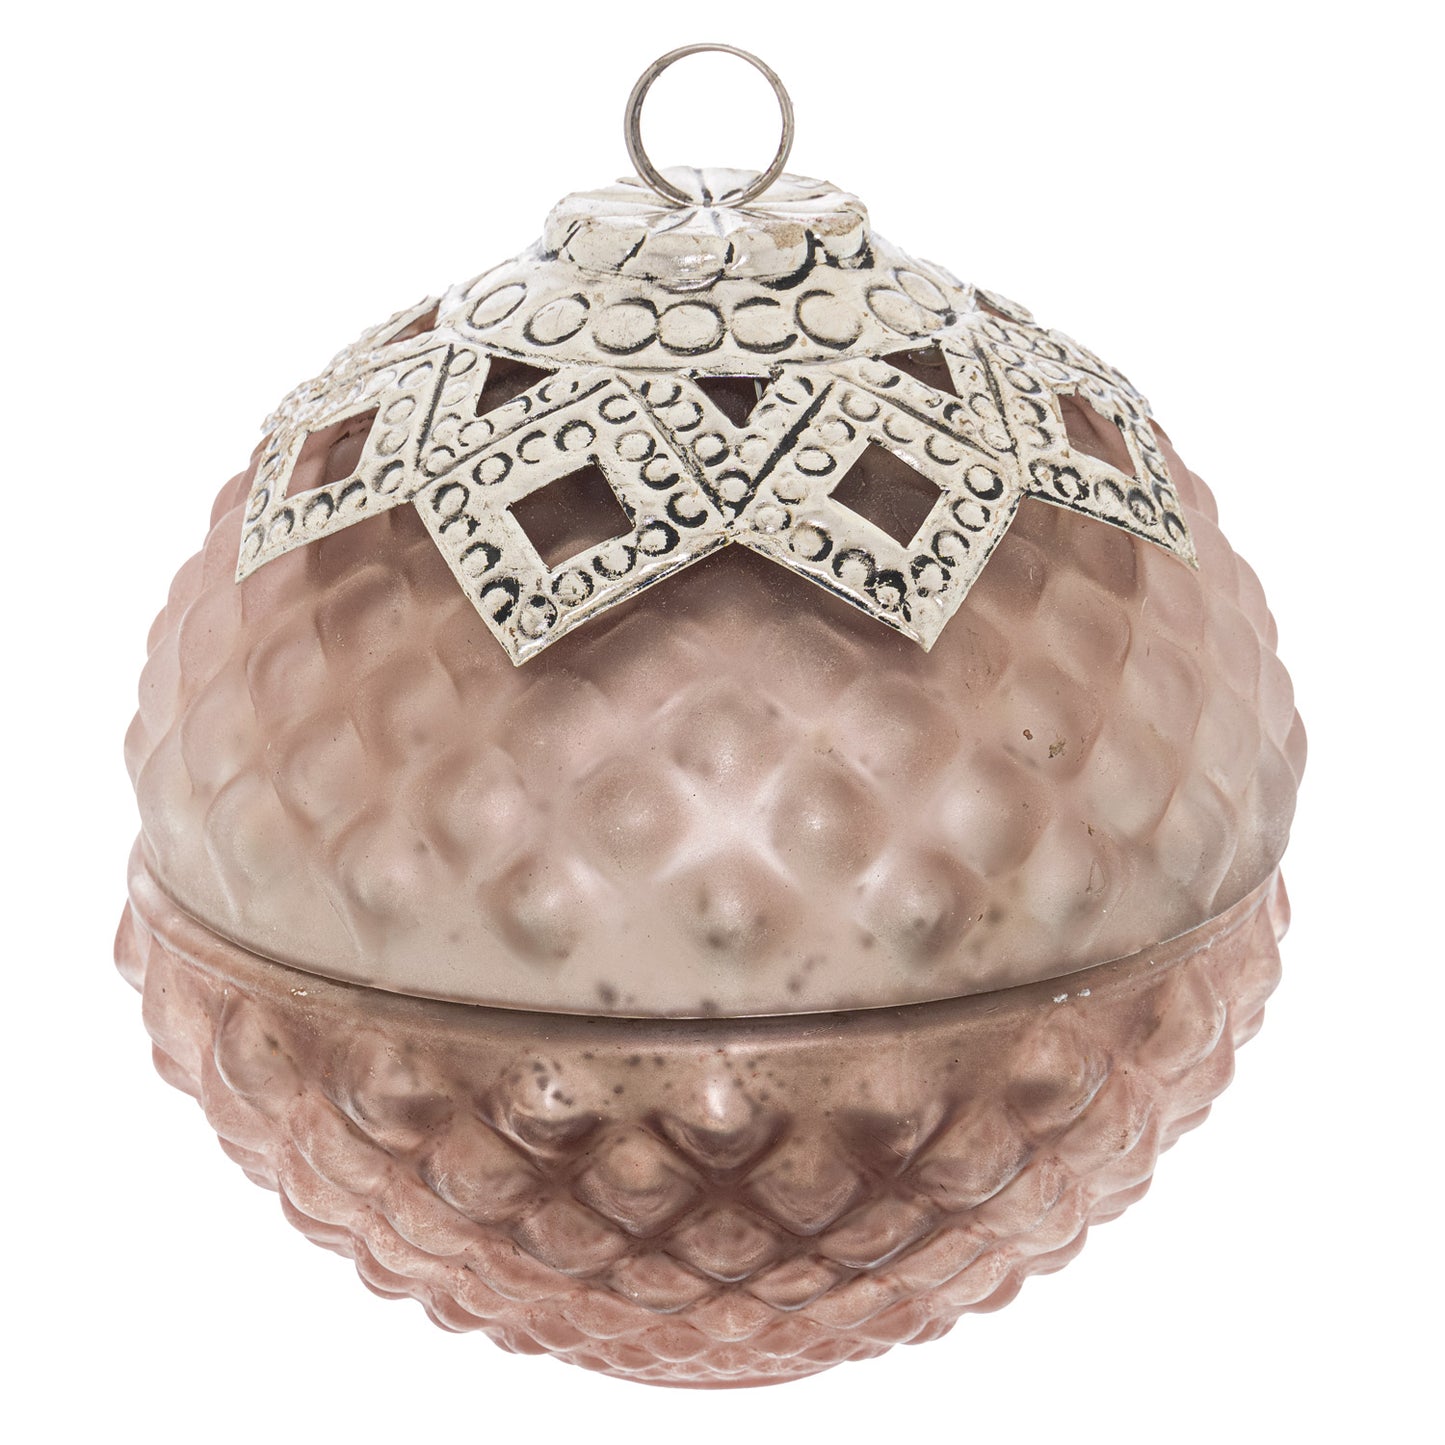 The Noel Collection Venus Diamond Crested Trinket Bauble